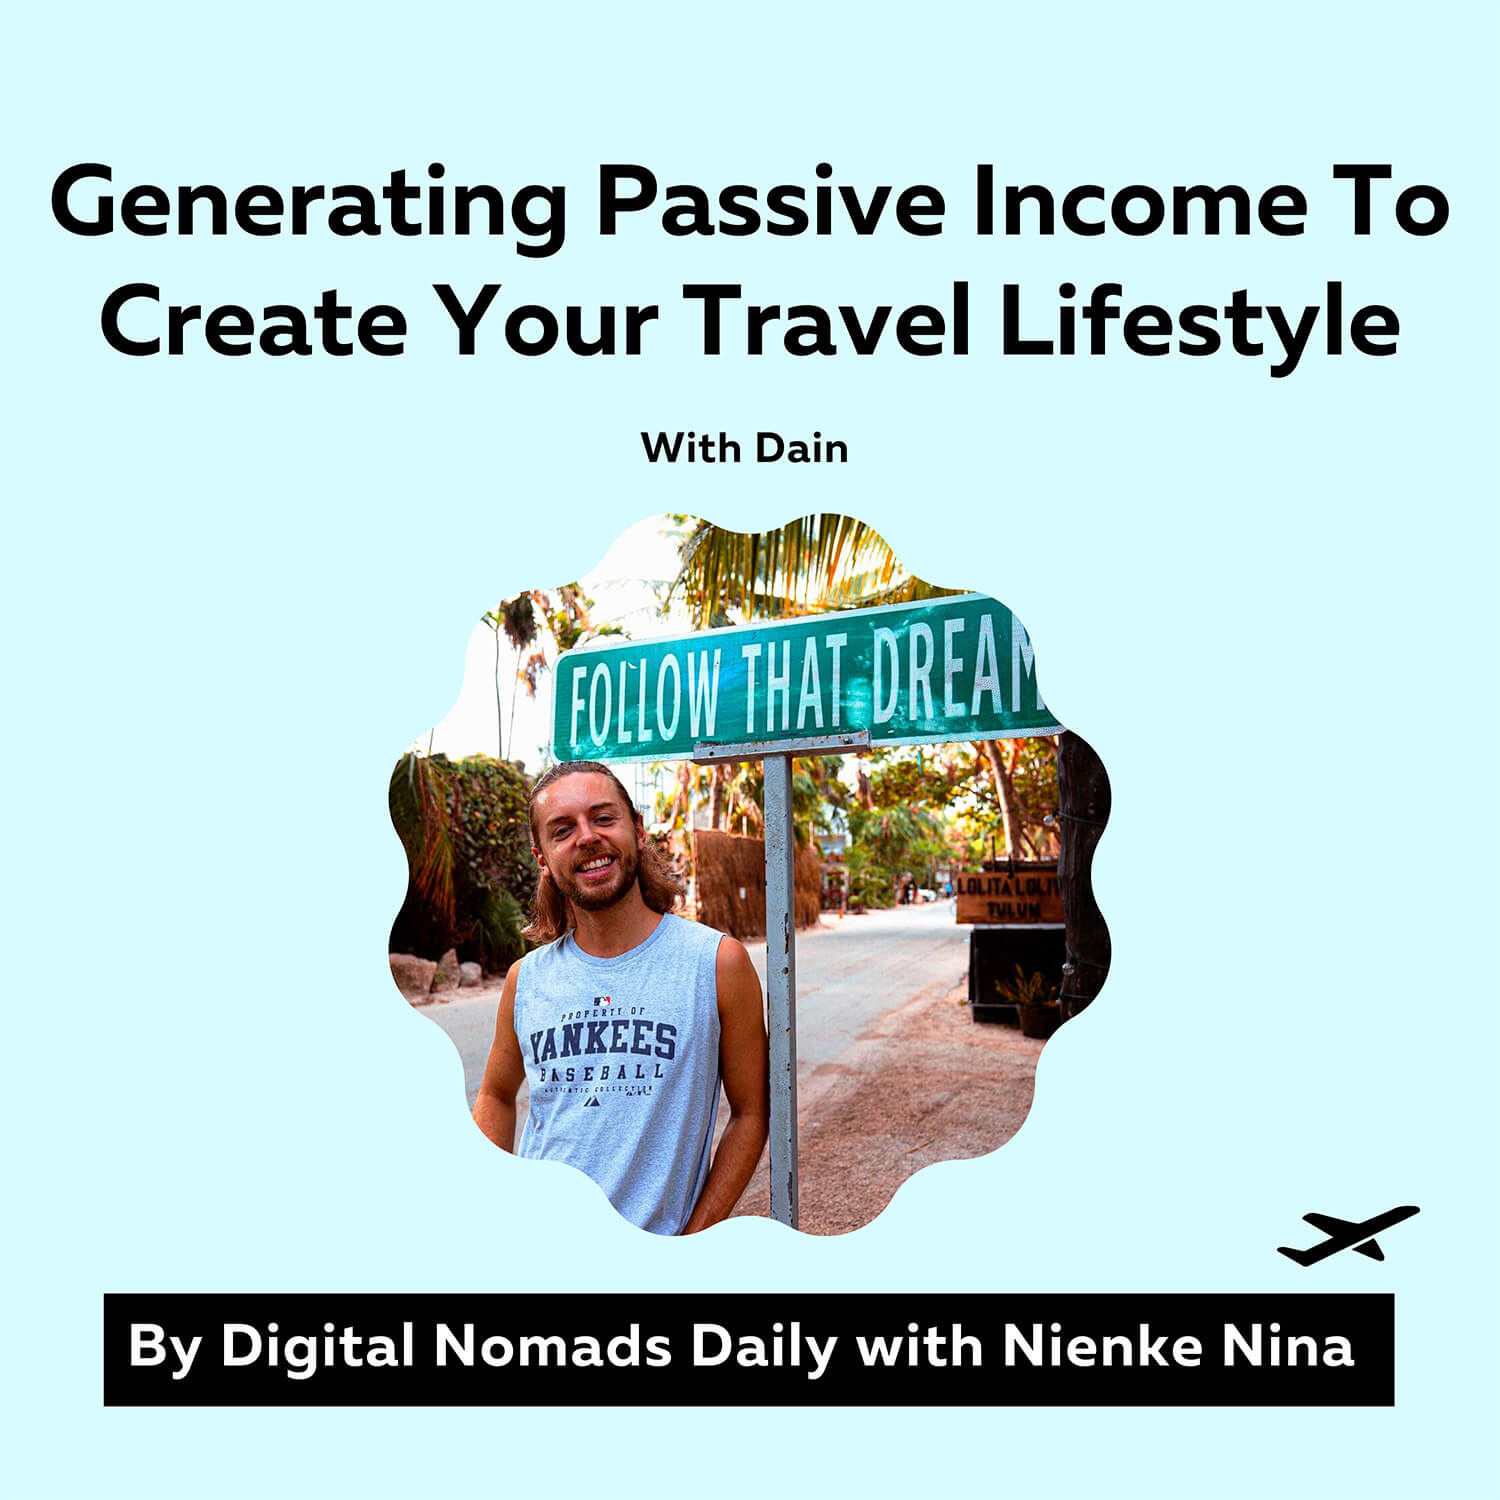 The Digital Nomads Daily Podcast Episode 58 Generating Passive Income To Create Your Travel Lifestyle with Dain (1)